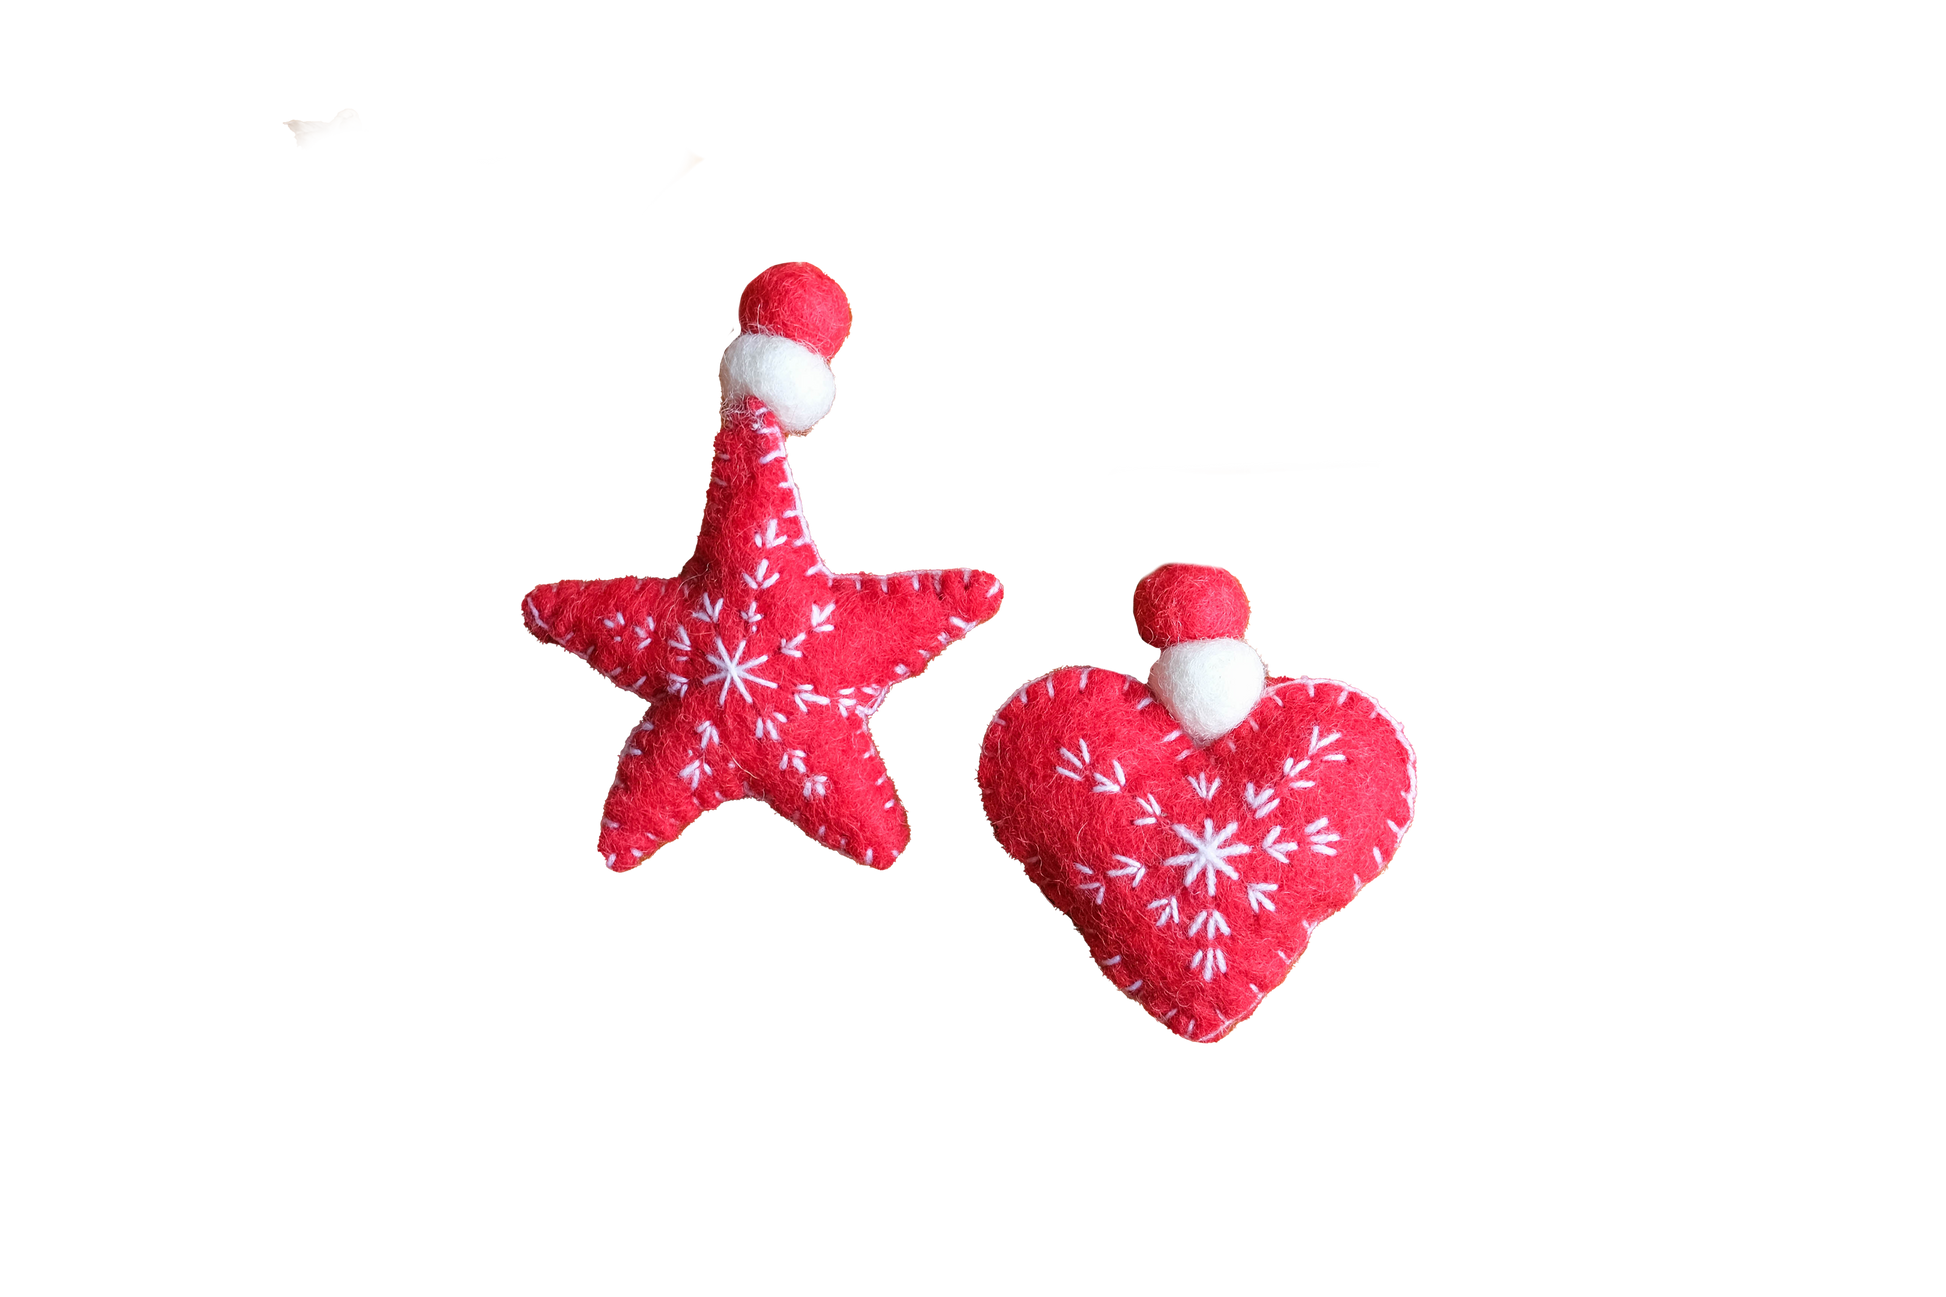 This Global Groove Life, handmade, ethical, fair trade, eco-friendly, sustainable, red and white, heart and star felt ornament set was created by artisans in Kathmandu Nepal and will be a beautiful and fun addition to your Christmas tree this holiday season.